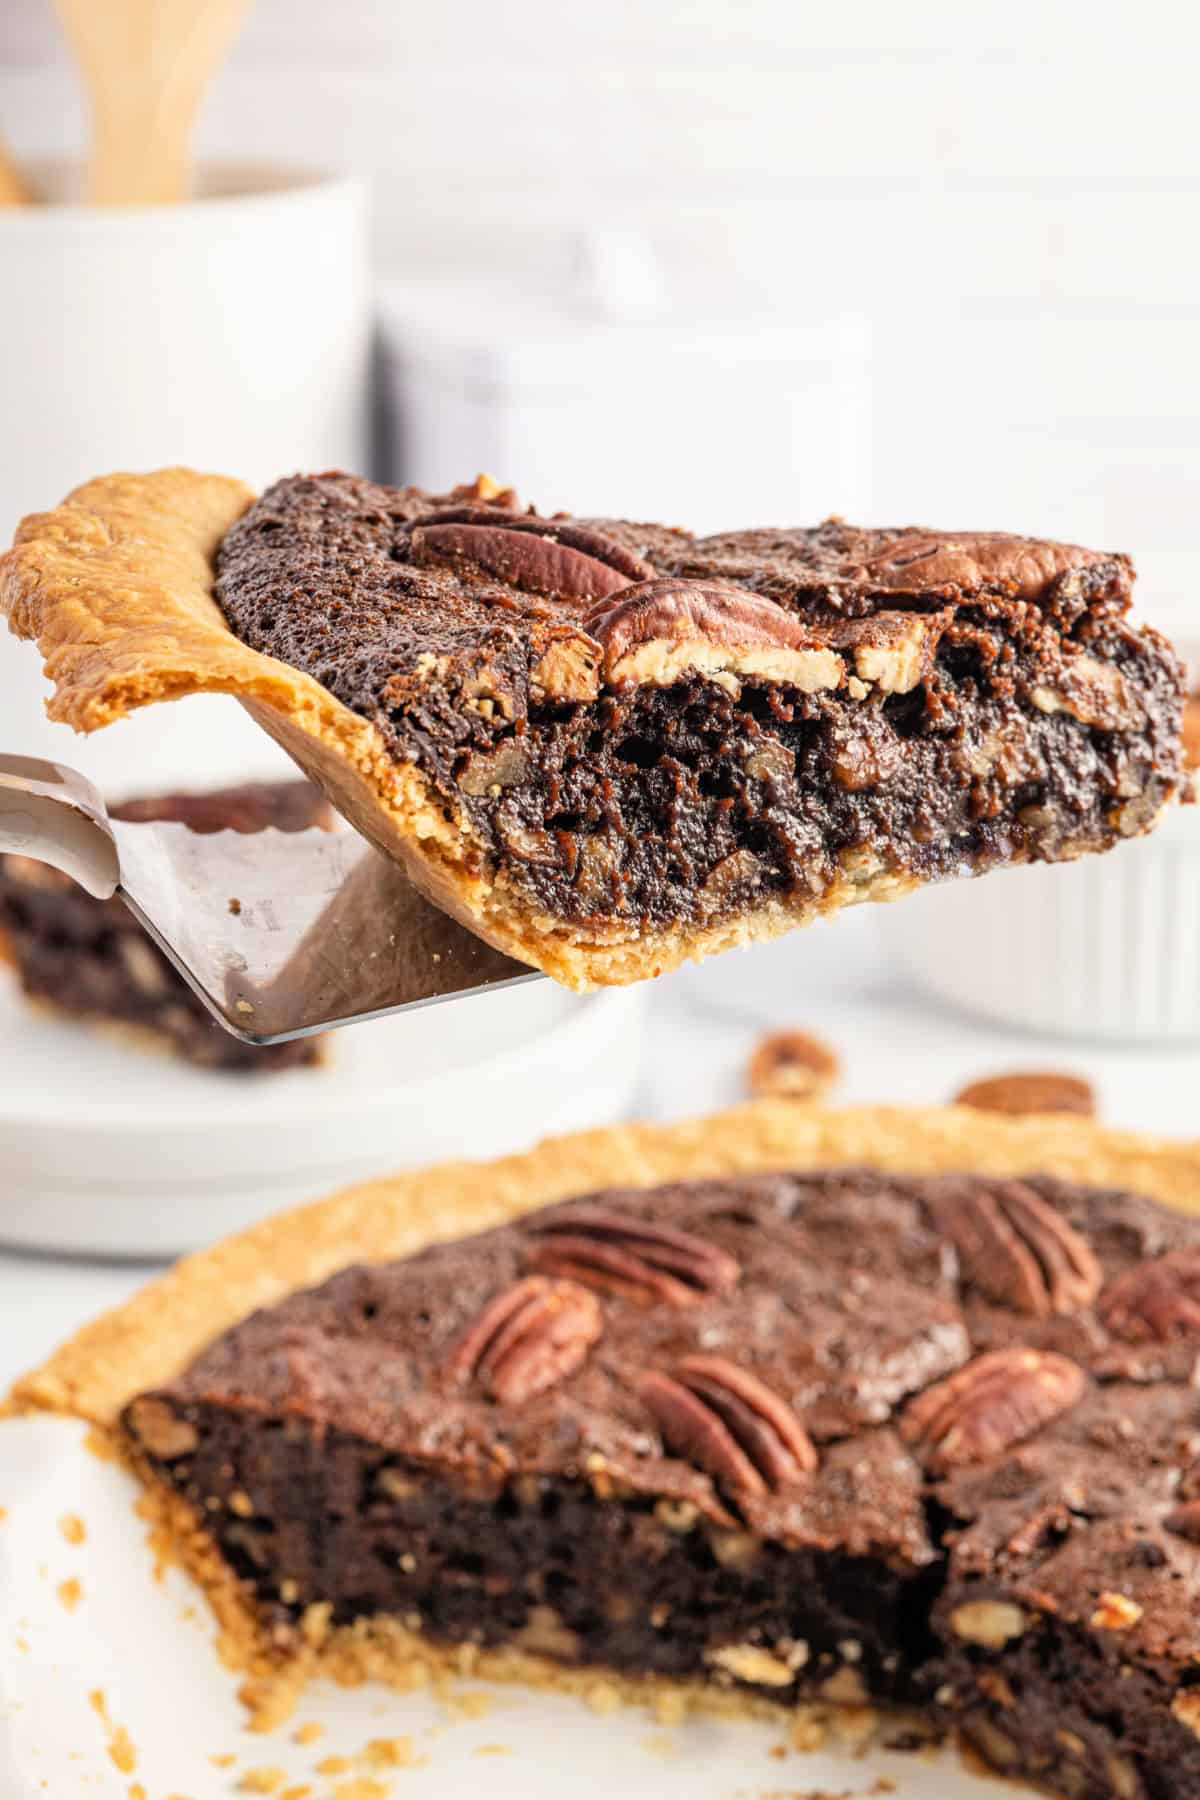 Slice of chocolate pecan pie being served from the pan.